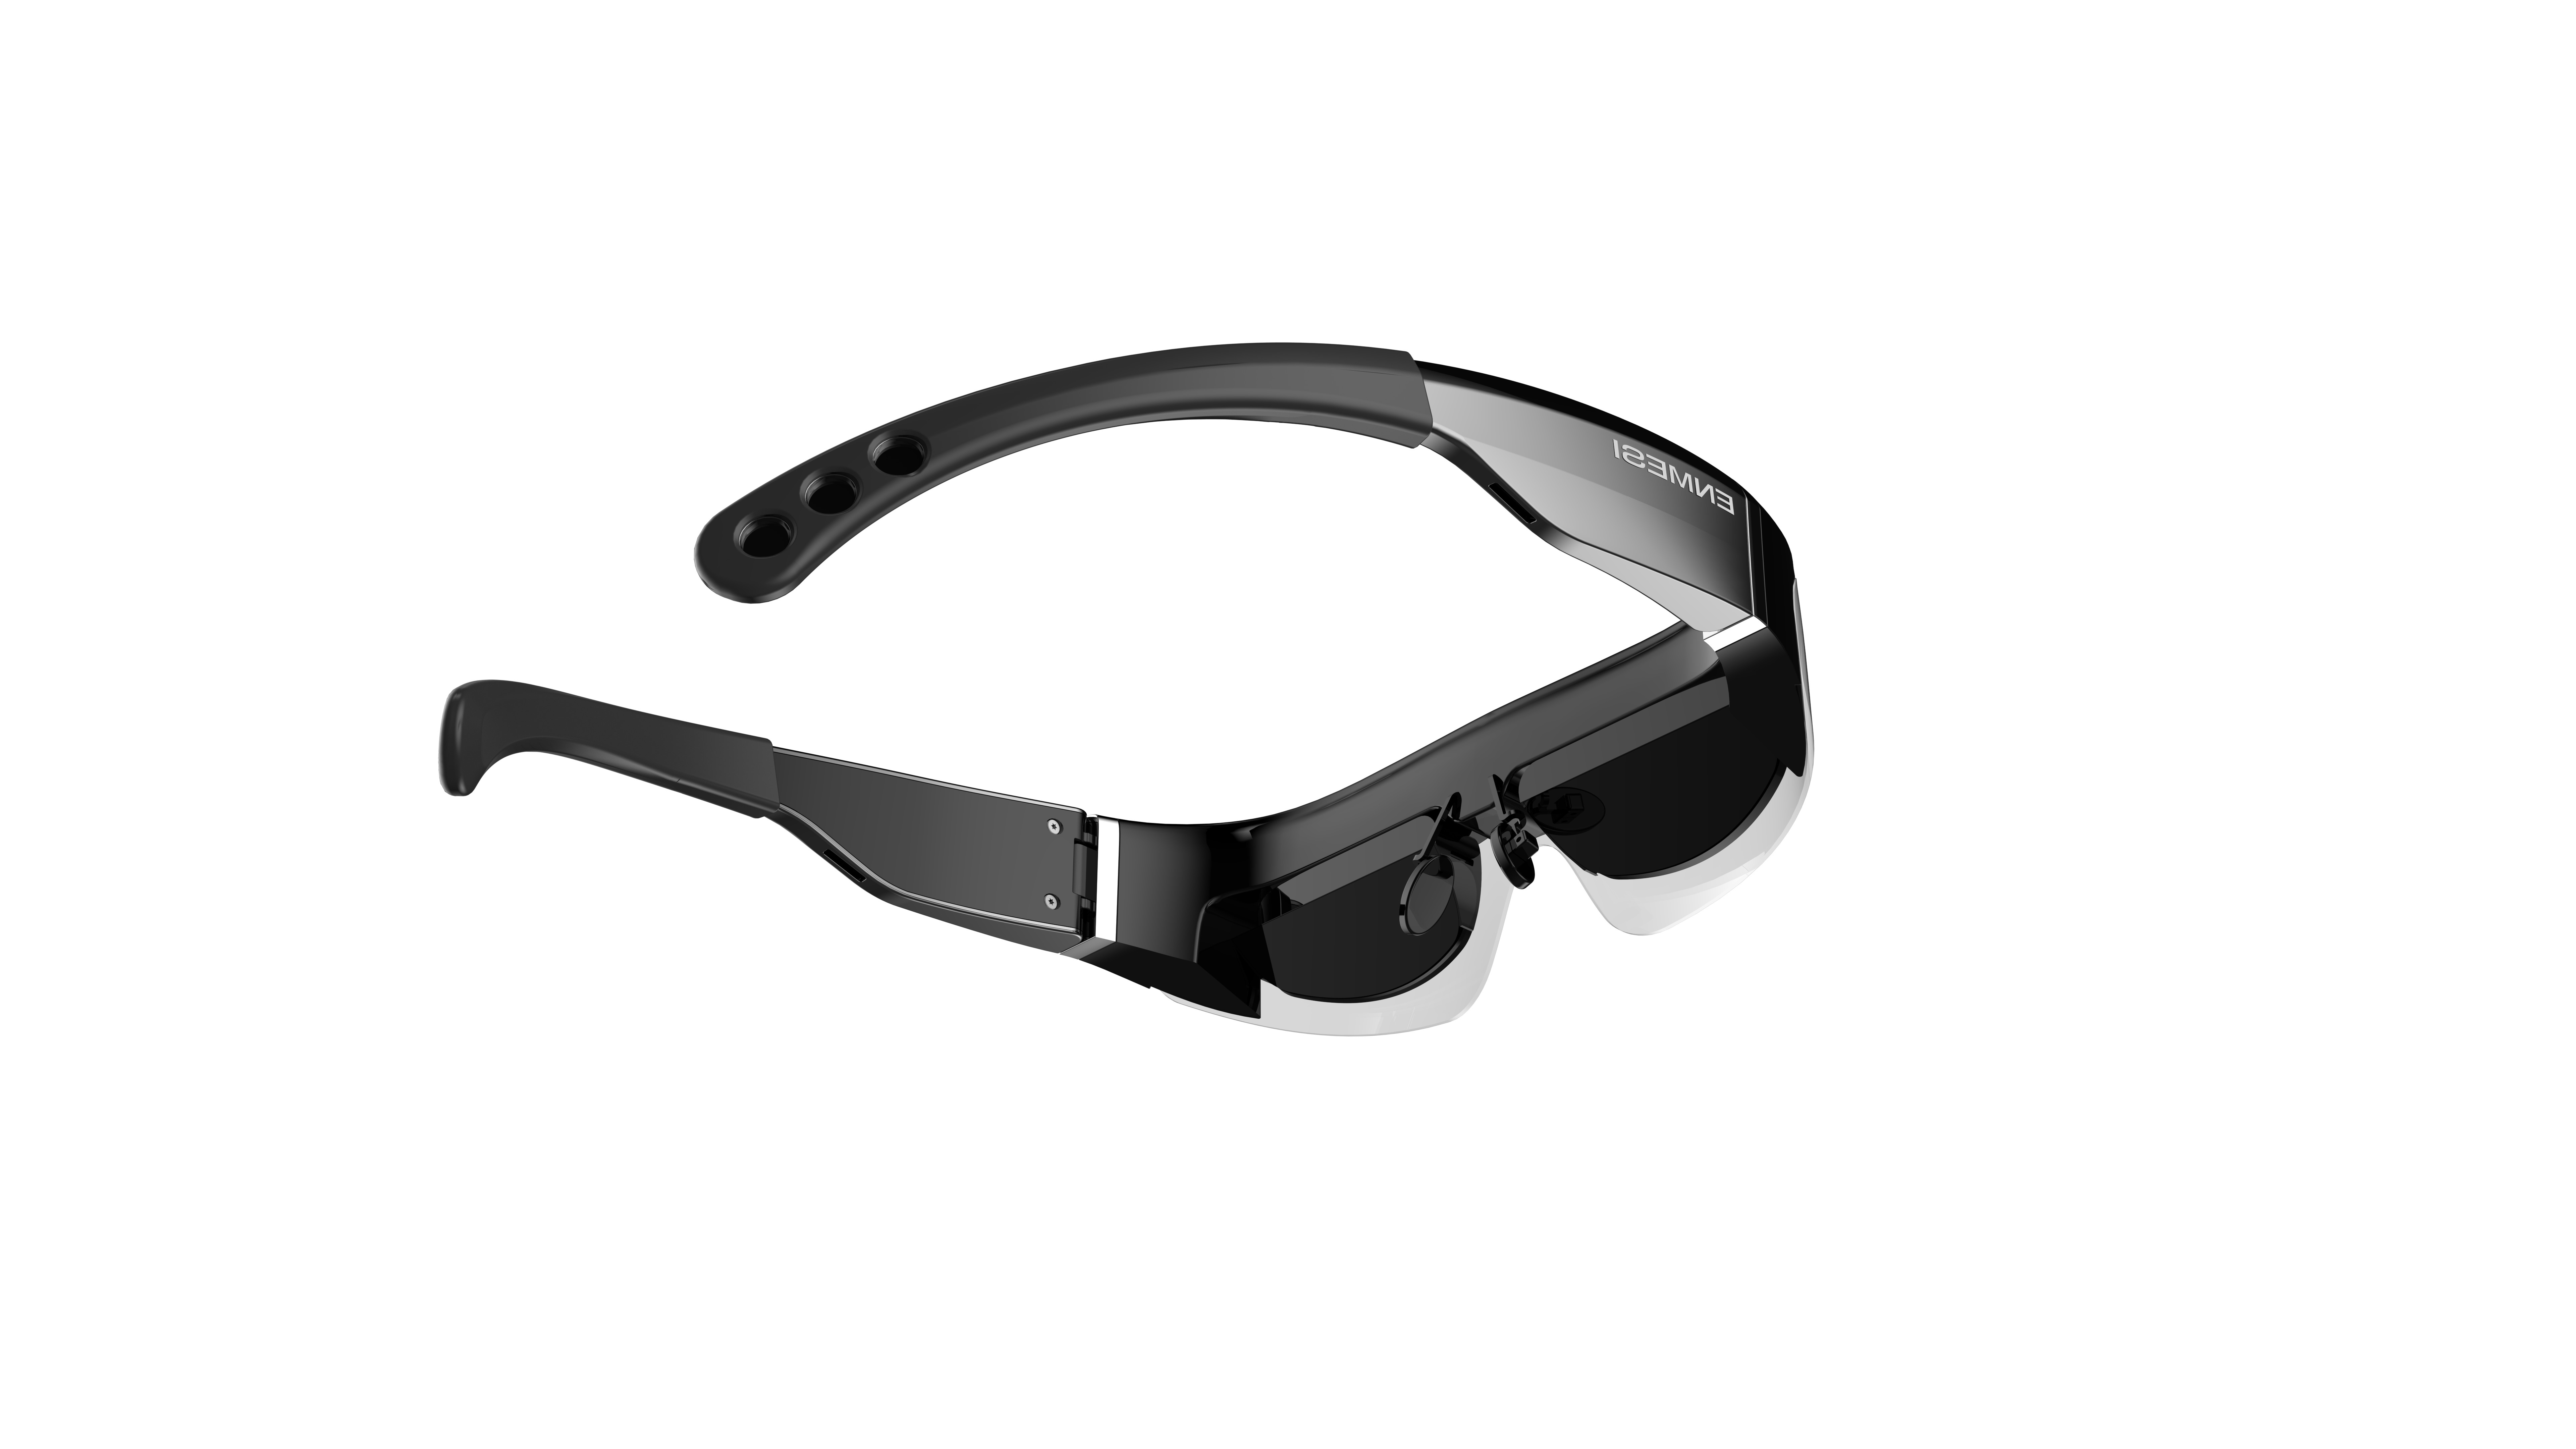 0.49 Inch 1080P AR Smart Glasses 2000 Nits With HDMI Interface